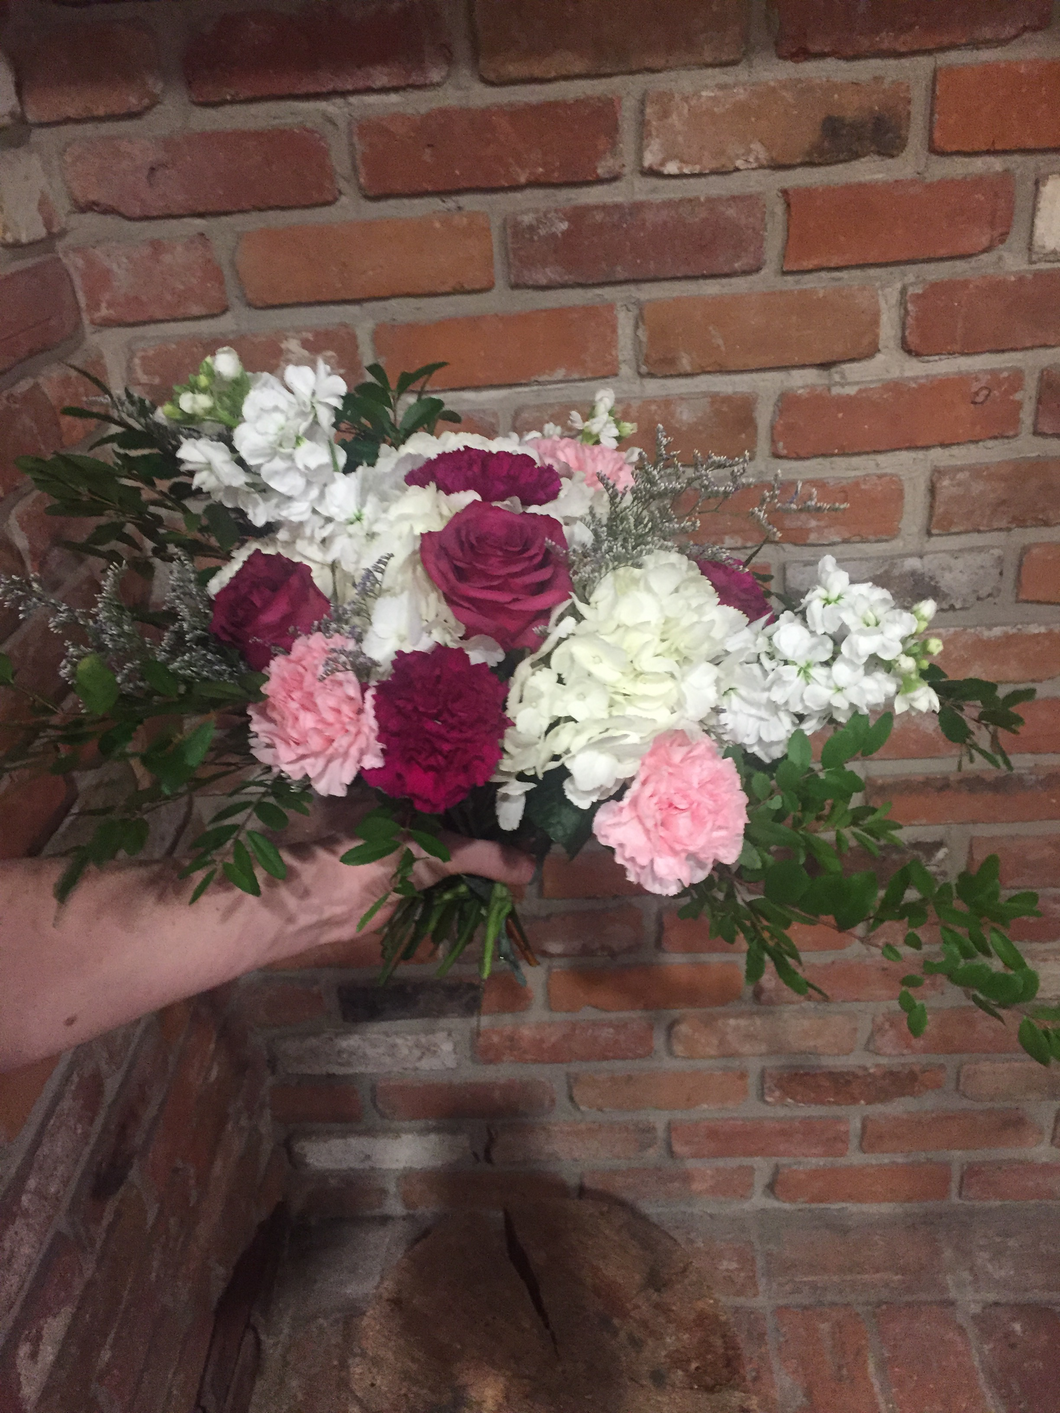 A beautiful garden style hand tied bouquet including a jumbo white hydgrangea, fragrant white stocks, blueberry roses and plum and light pink carnations. A touch of whispy lavender limonium and an assortment of foliages add loads of texture! Arranged and ready for your recipient to drop in their vase